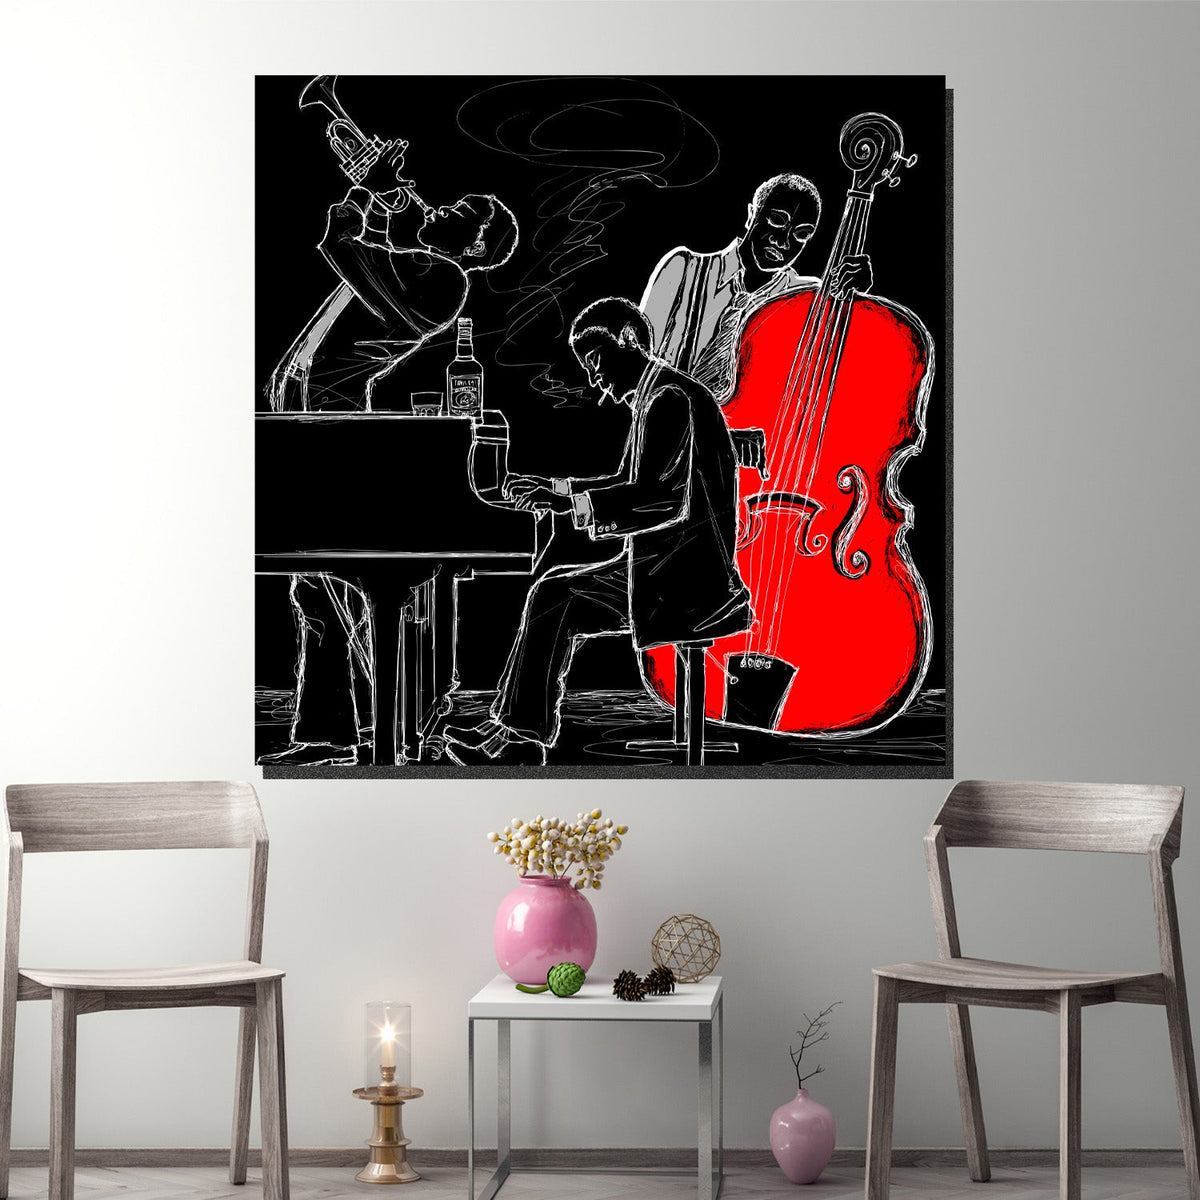 https://cdn.shopify.com/s/files/1/0387/9986/8044/products/JazzMusicBandCanvasArtprintStretched-1.jpg